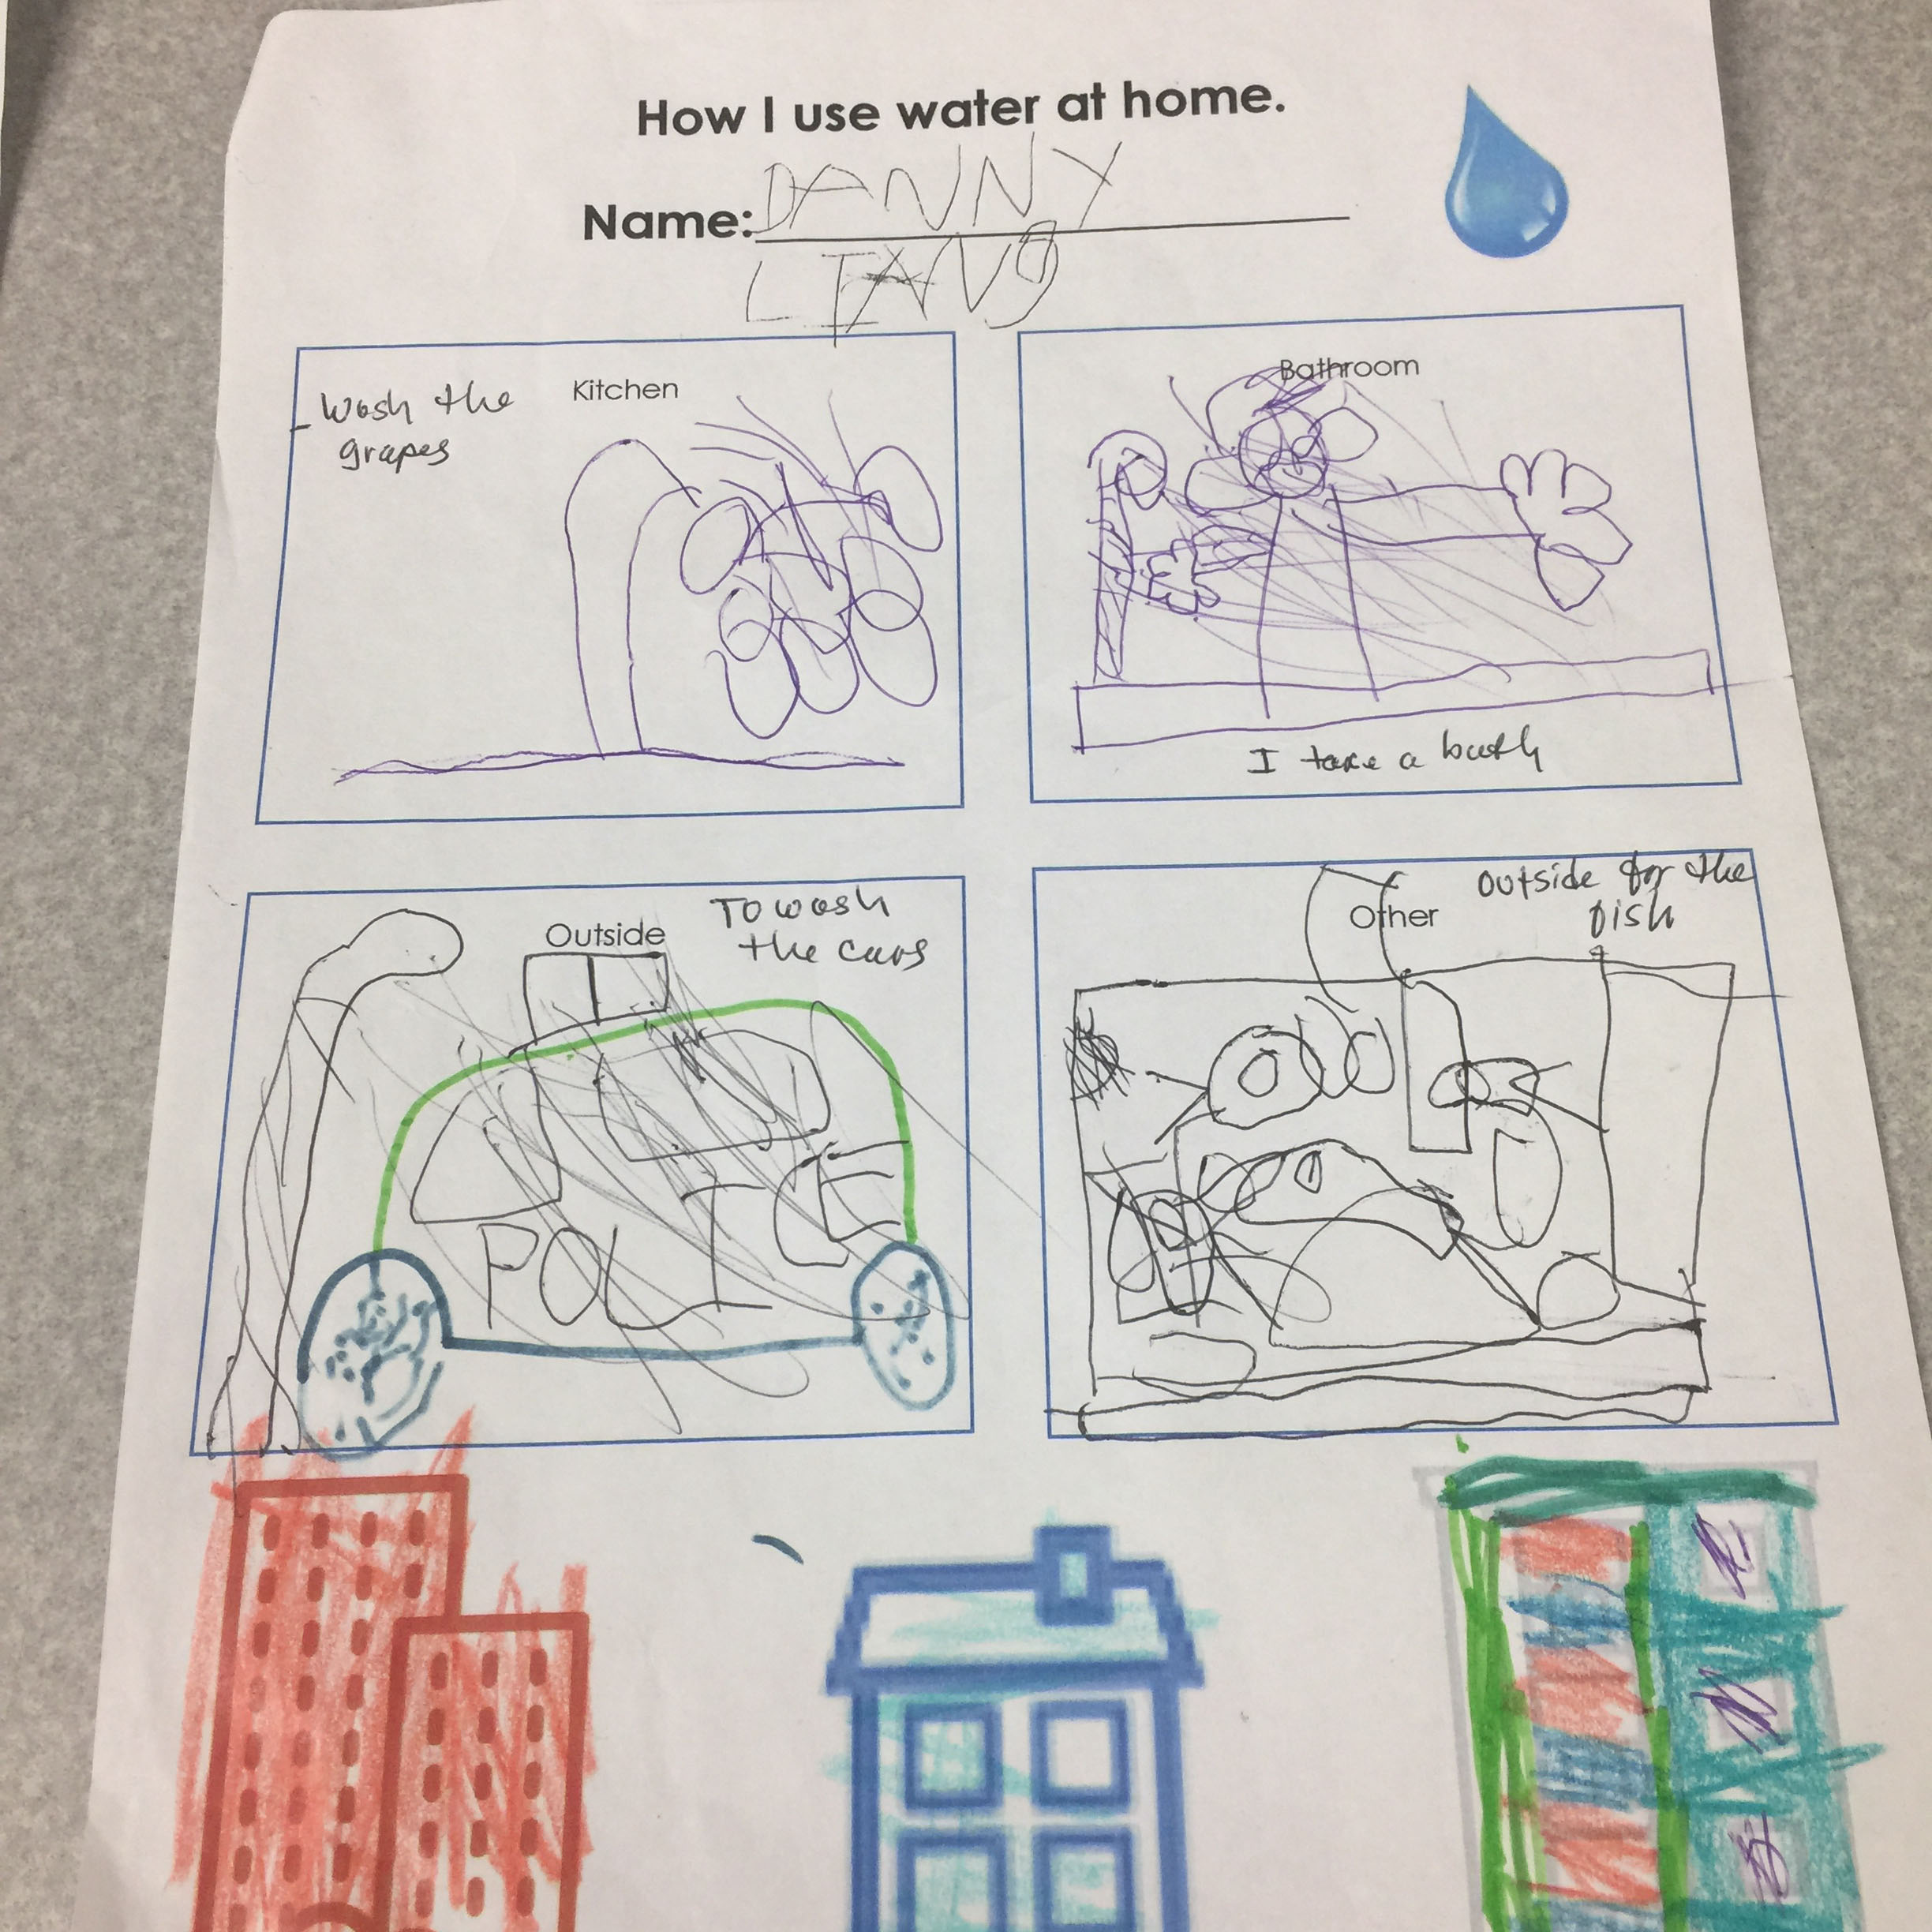 Children in Lucy's class make and compare drawings of their homes.